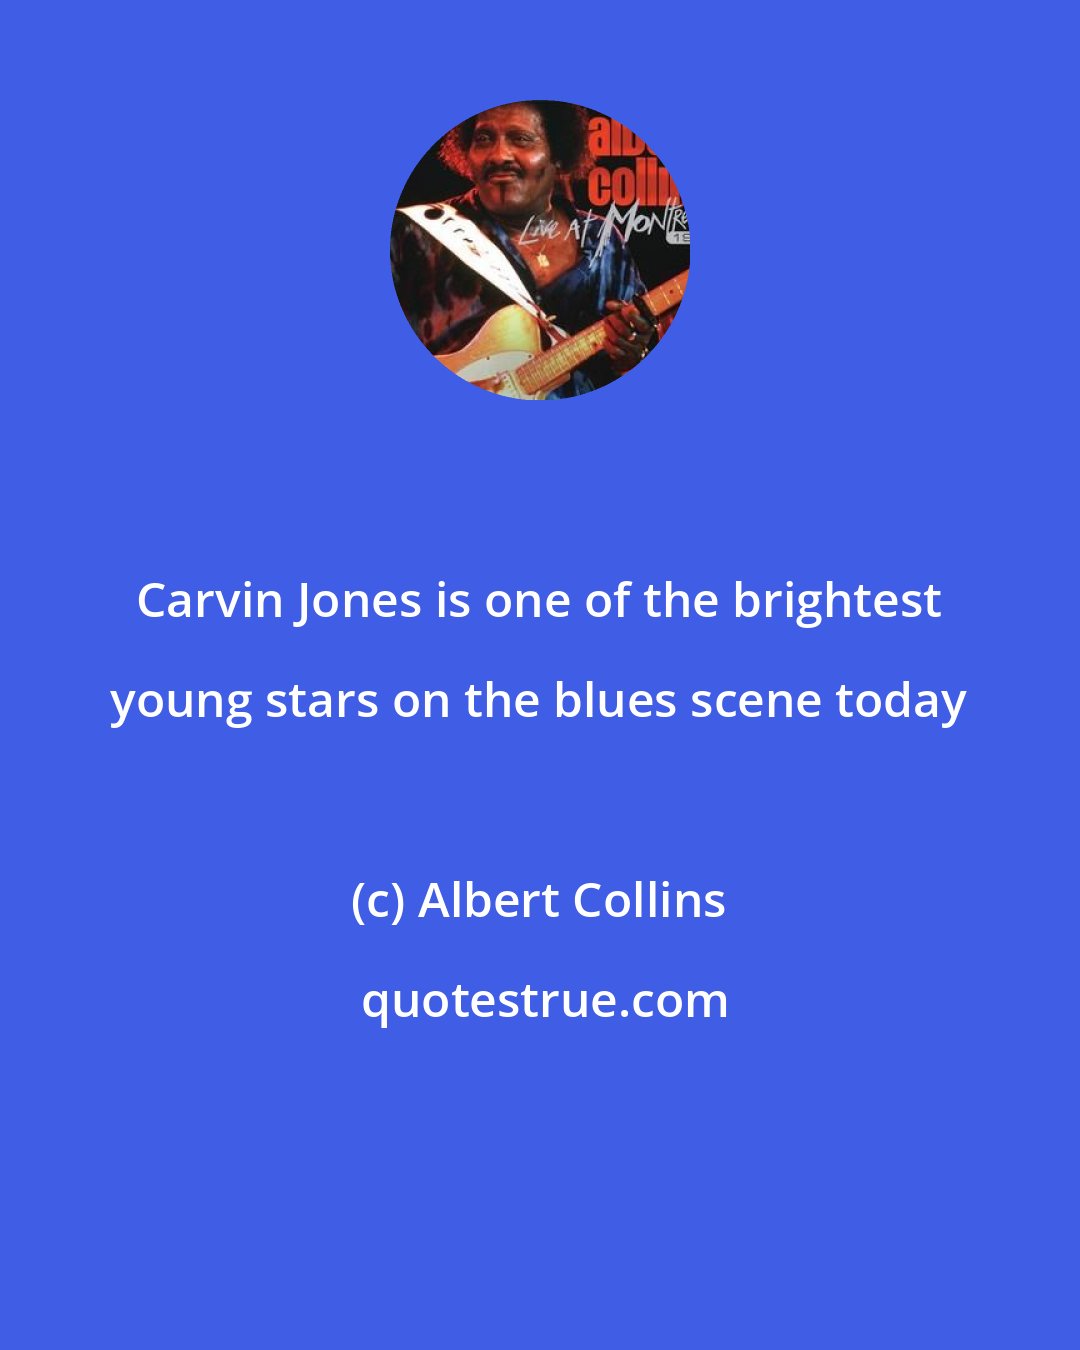 Albert Collins: Carvin Jones is one of the brightest young stars on the blues scene today